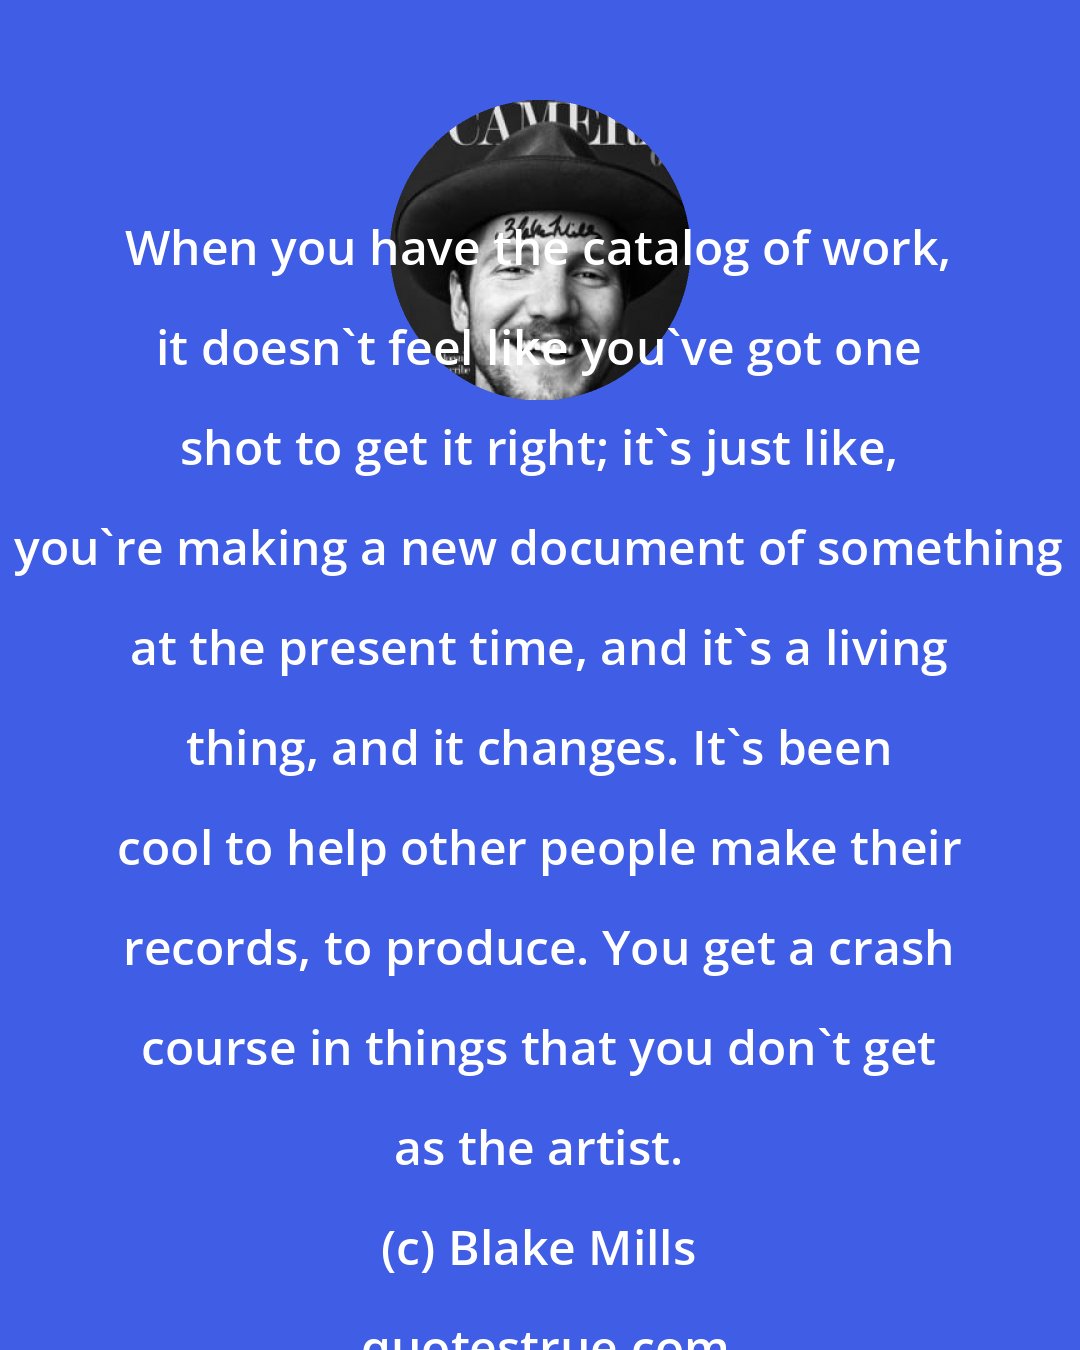 Blake Mills: When you have the catalog of work, it doesn't feel like you've got one shot to get it right; it's just like, you're making a new document of something at the present time, and it's a living thing, and it changes. It's been cool to help other people make their records, to produce. You get a crash course in things that you don't get as the artist.